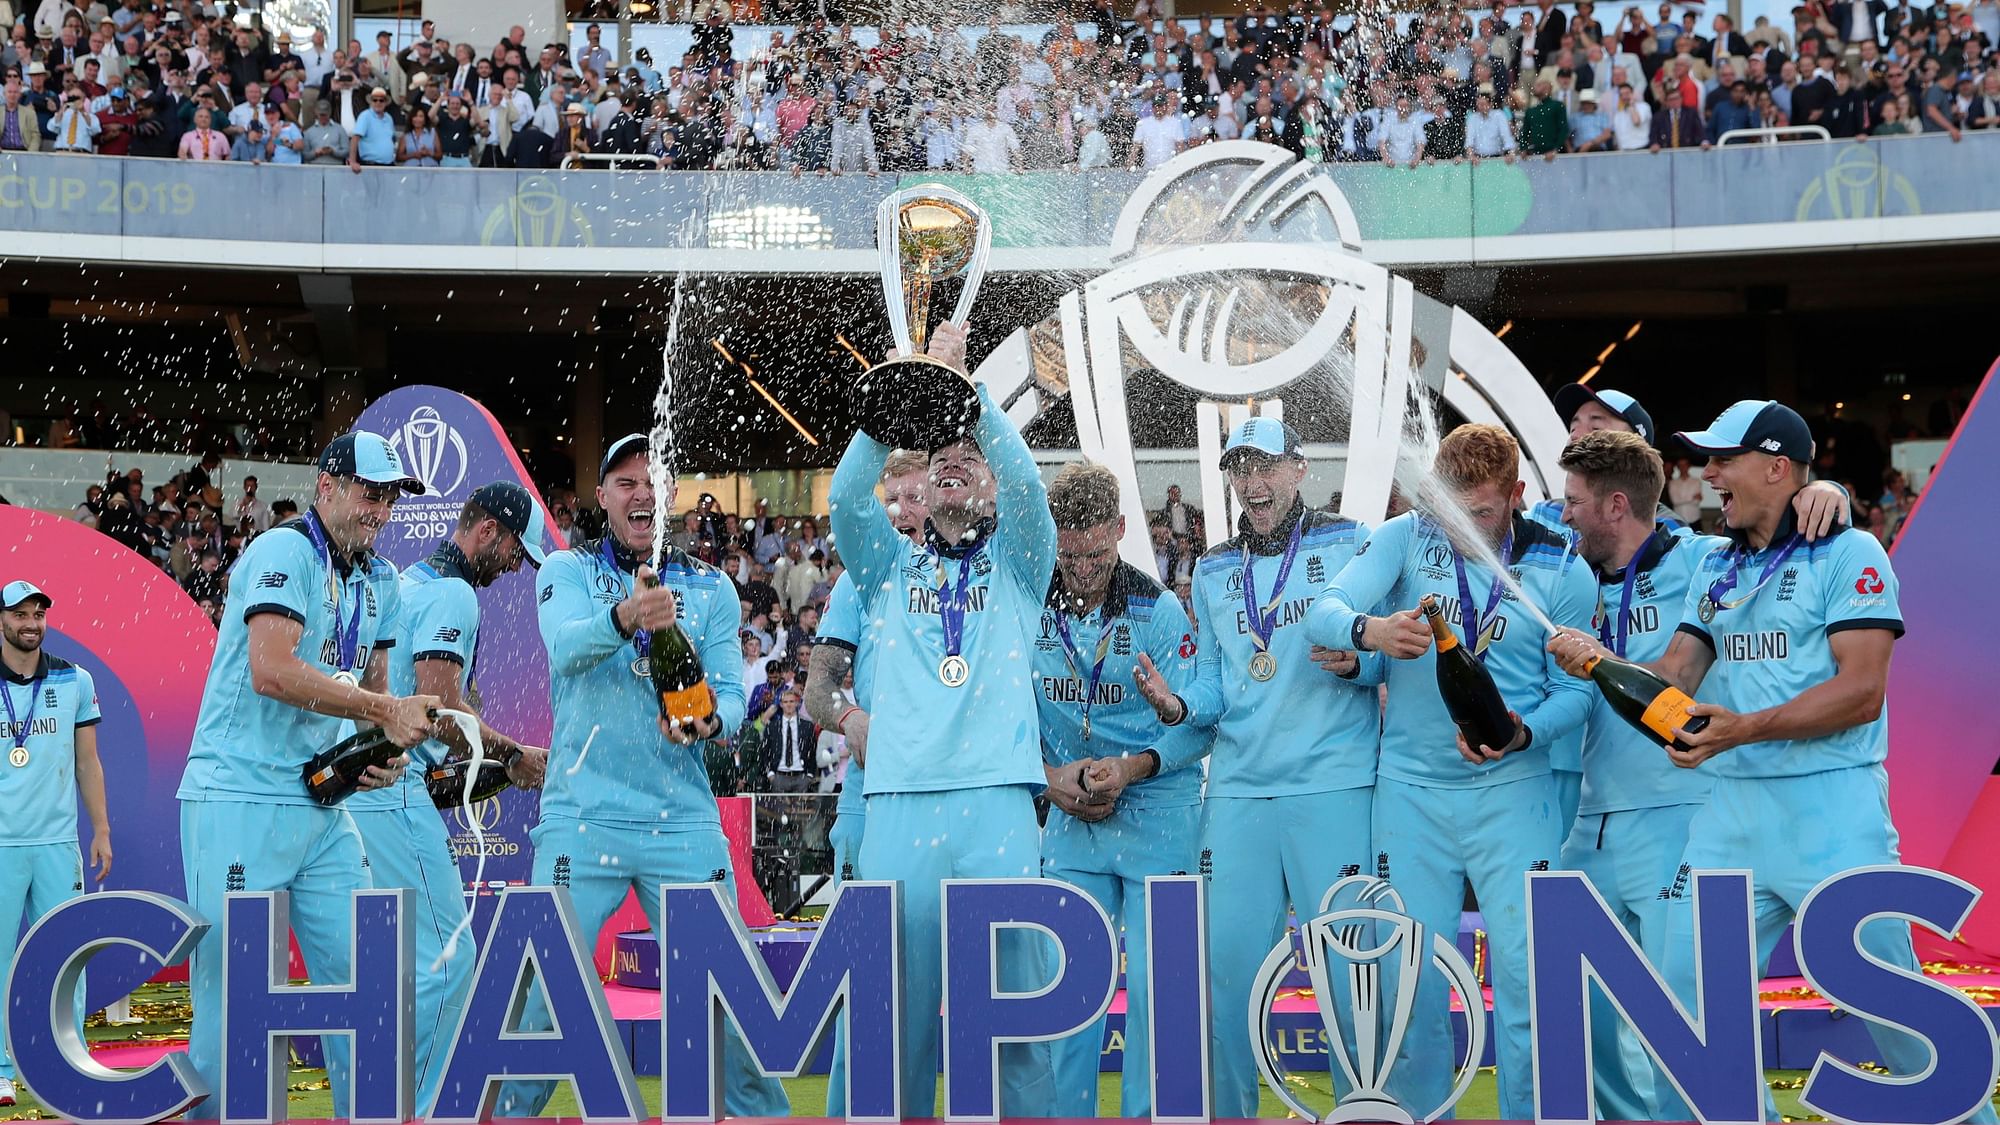 England became the third team after India and Australia to win the World Cup as the host nation.